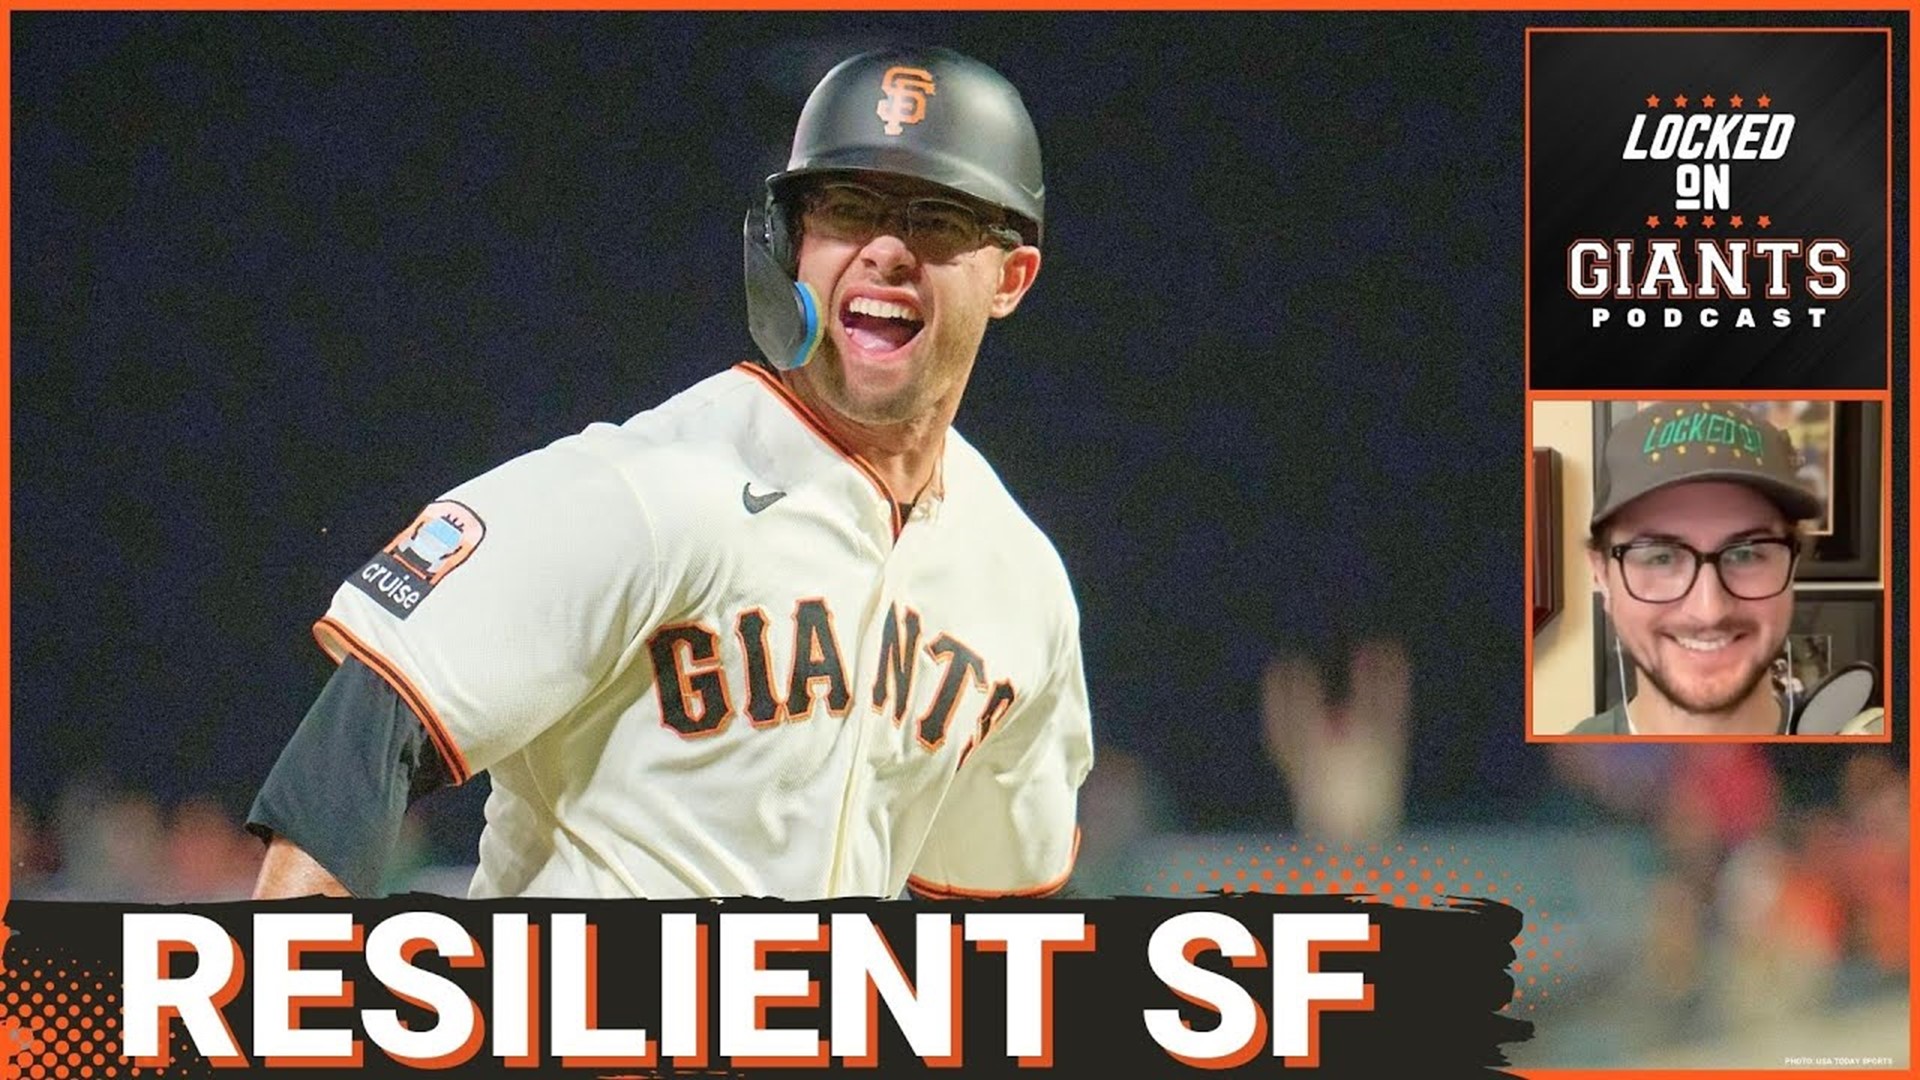 SF Giants continue playoff surge with another display of clutch resilience